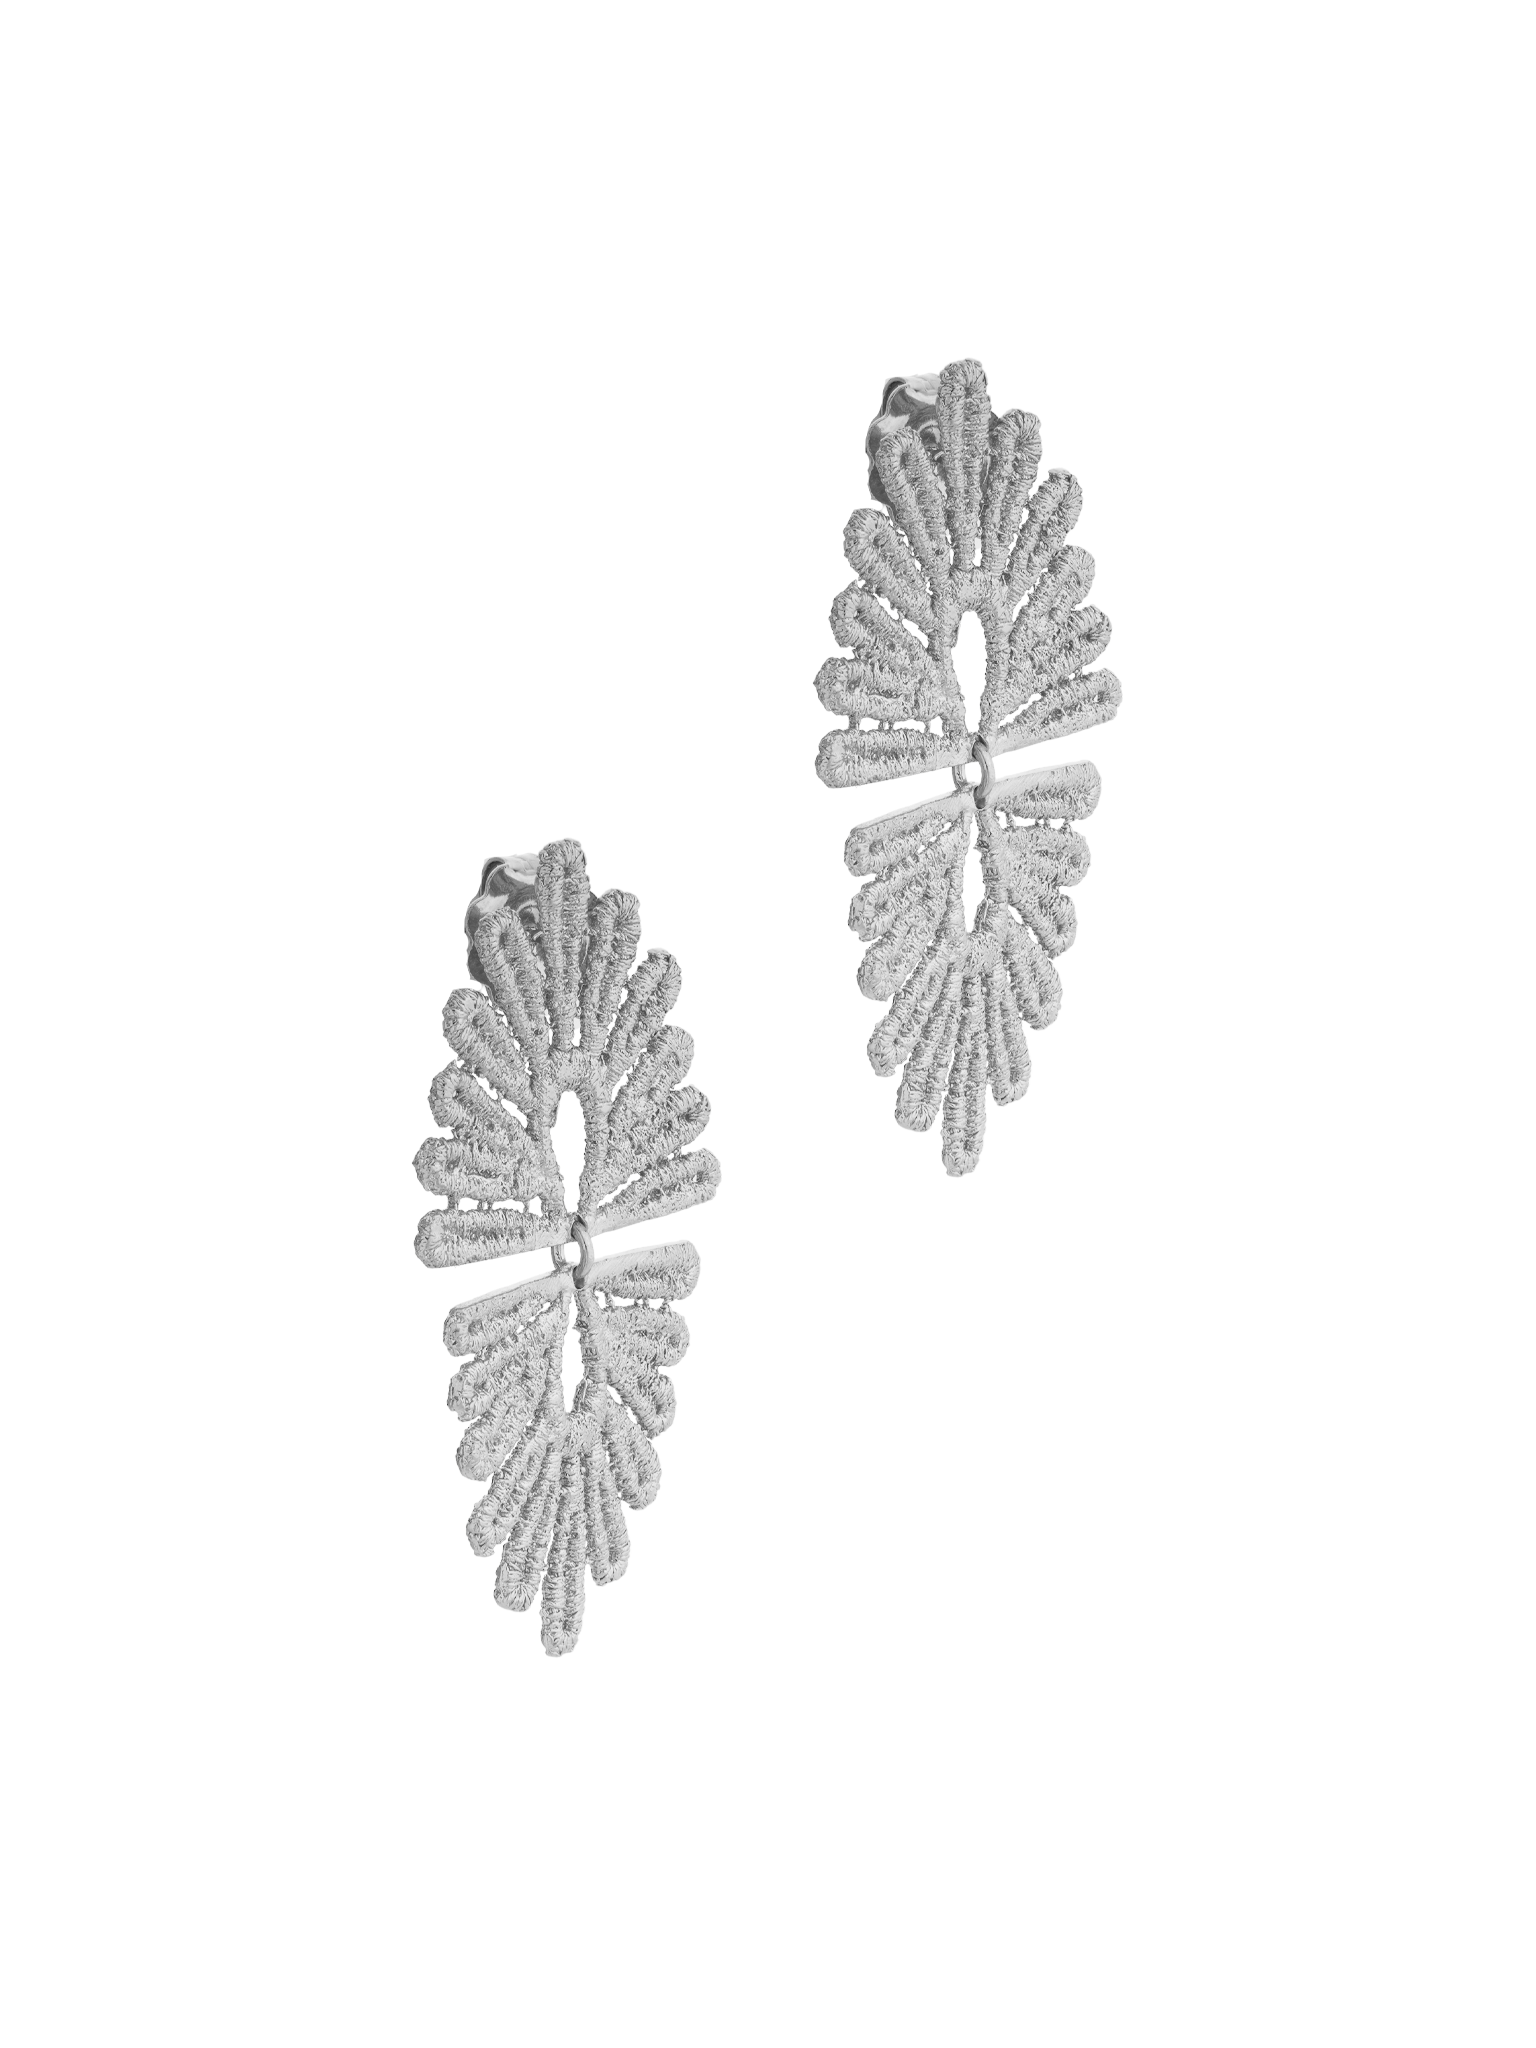 A pair of vintage-inspired silver earrings, The Guipure, adorned with a delicate flower design by Cremilde Bispo Jewellery.